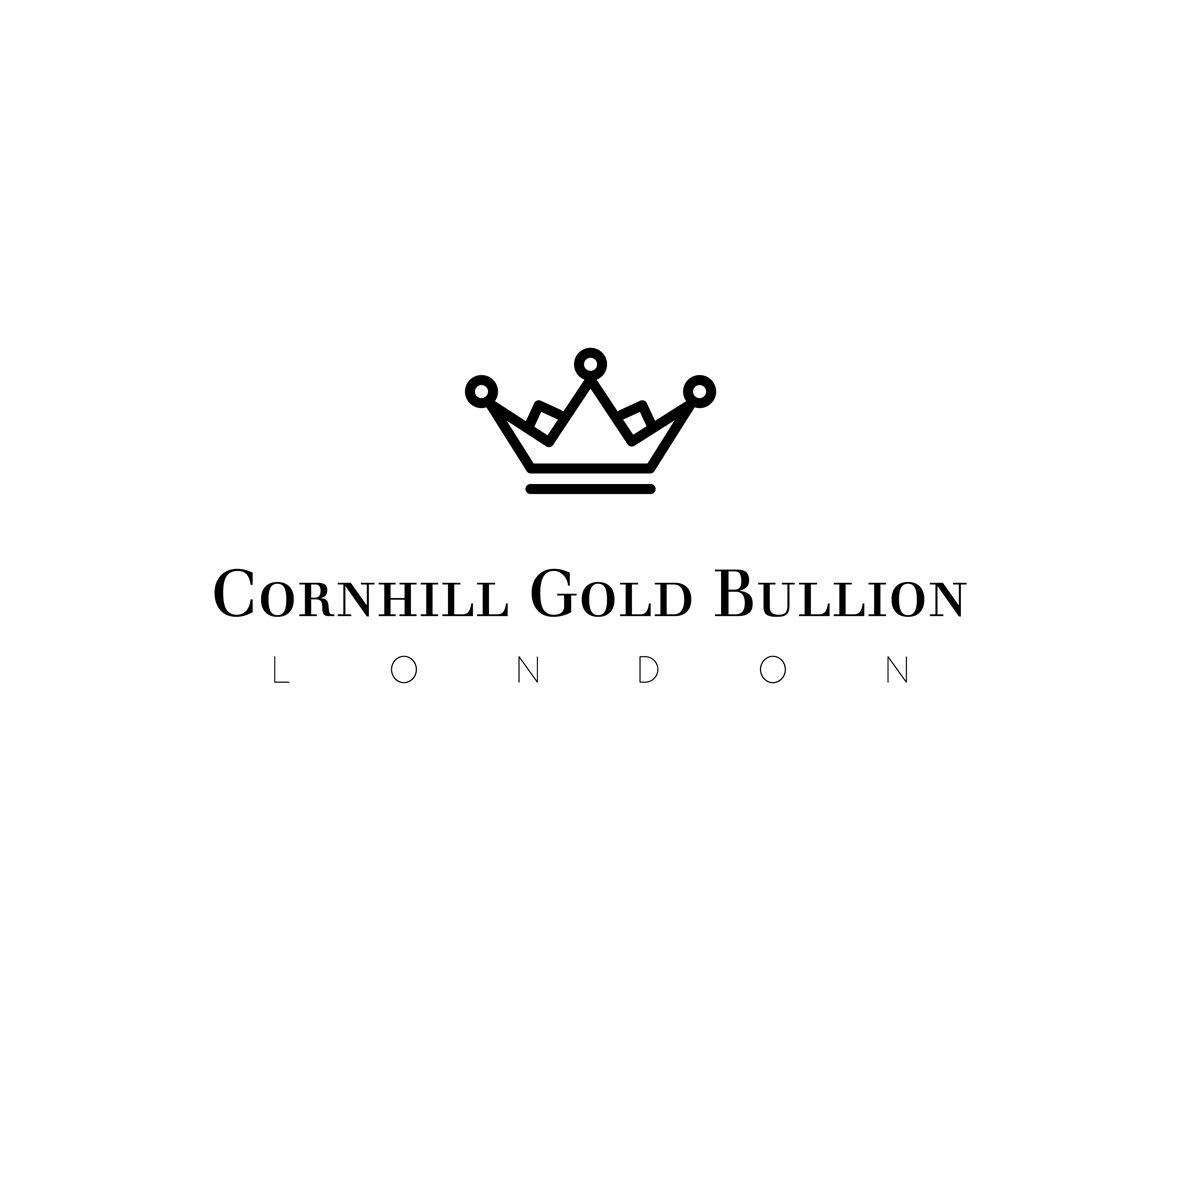 Gold Black and White Construction Logo - Construction Logo Design for Cornhill Gold Bullion with the option